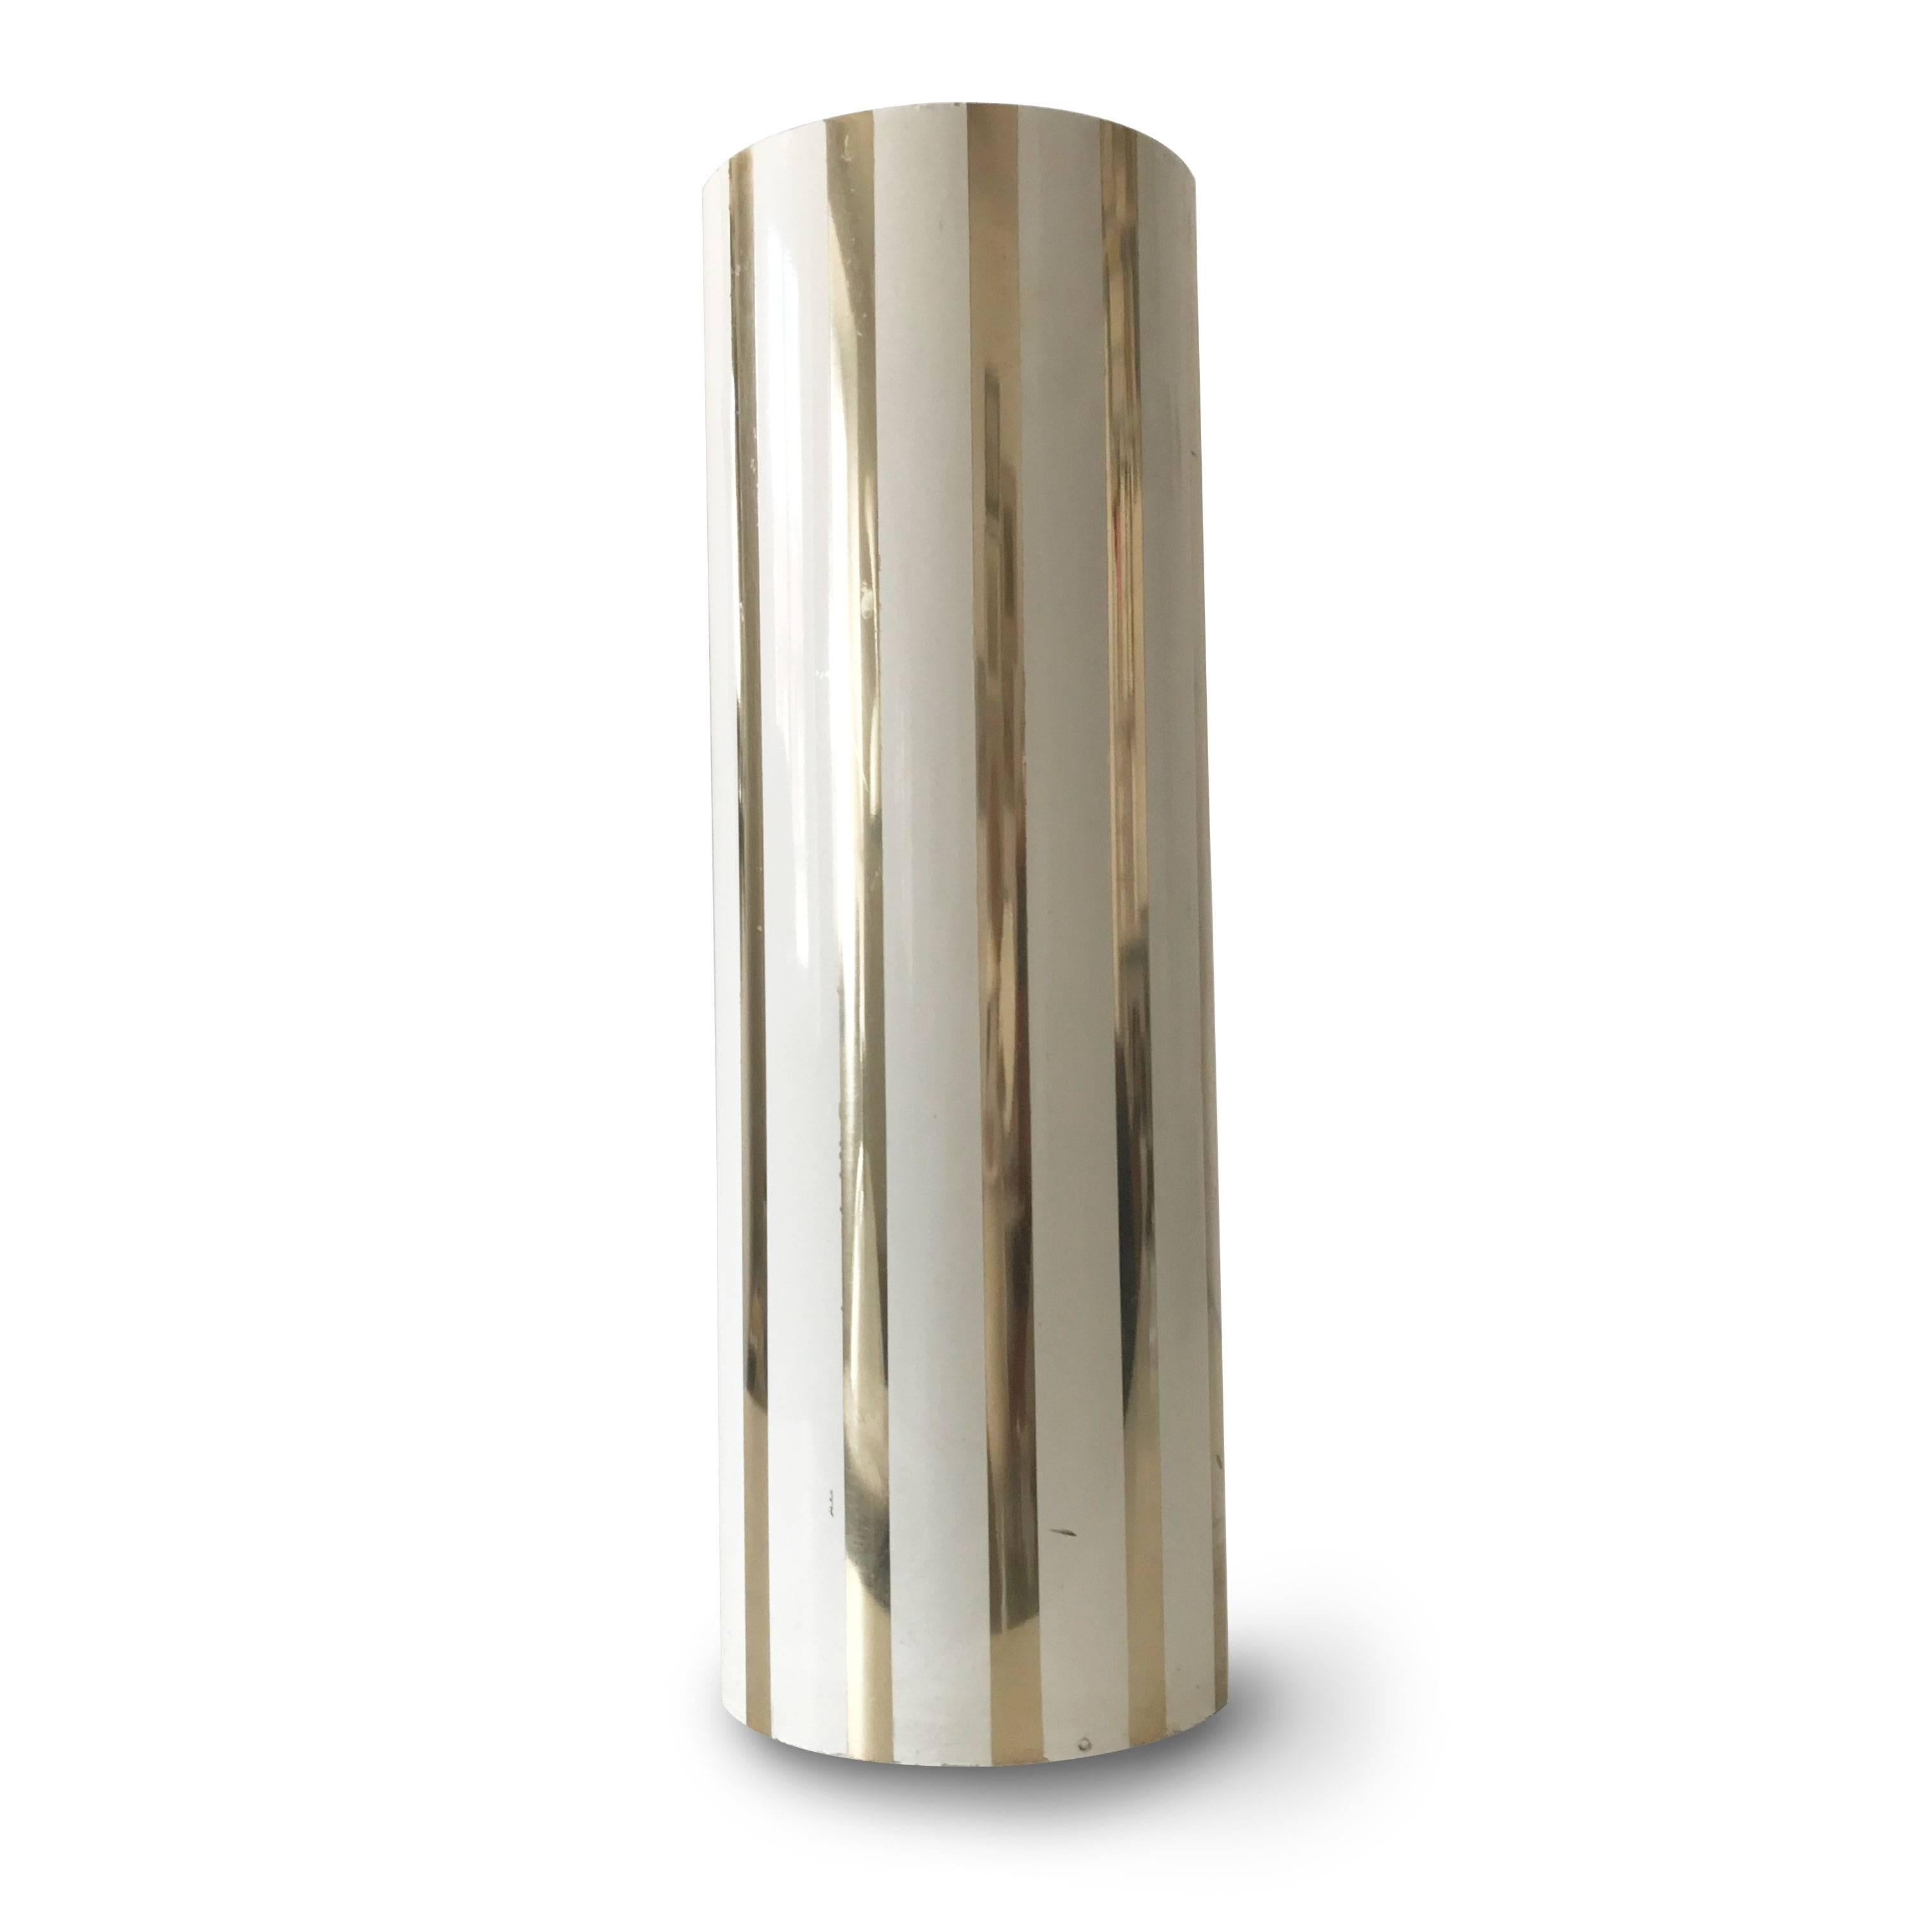 Elegant and decorative Mid-Century Modern umbrella stand. Designed probably by Piero Fornasetti, 1950s, Italy.

Executed in metal which is enameled in white and gold strips. 

Condition:
Good  original vintage condition. Wear consistent with use and